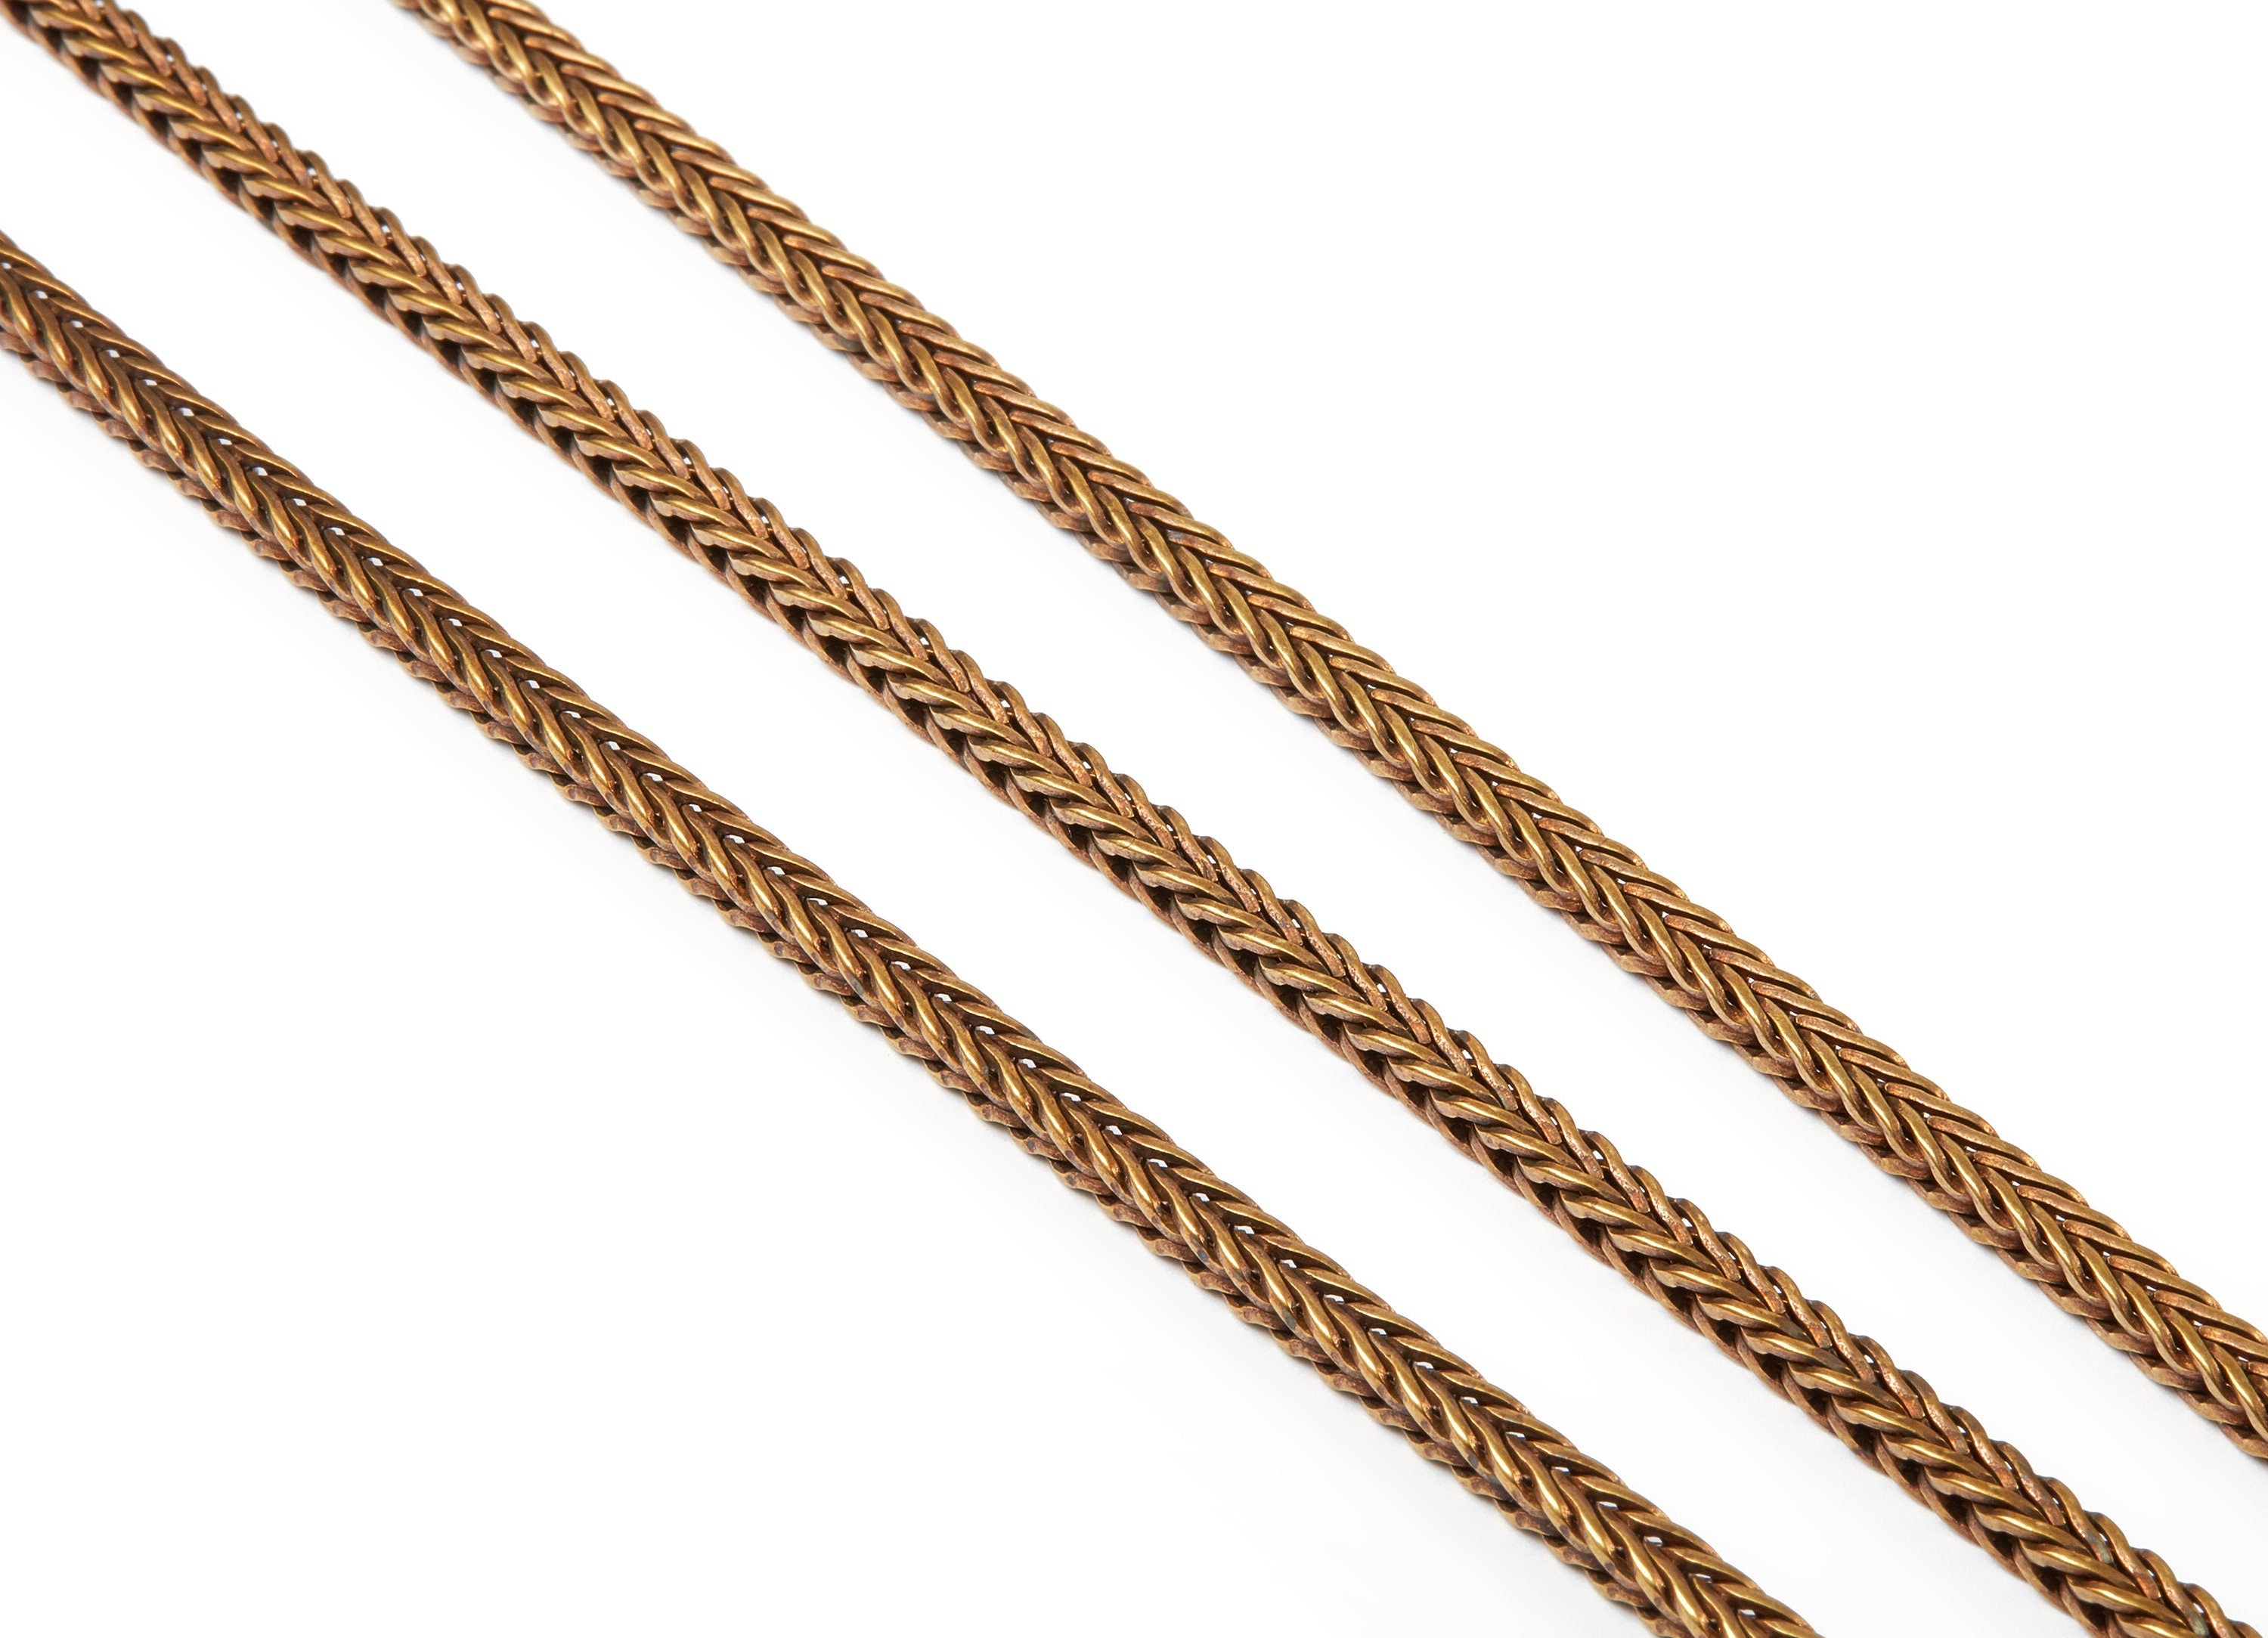 18K Gold Plated 5mm Fox Tail Chain Necklace Fashionable Unisex Gold Filled  Jewelry Accessory For DIY Projects 30 Inches From Youbeya33, $25.33 |  DHgate.Com